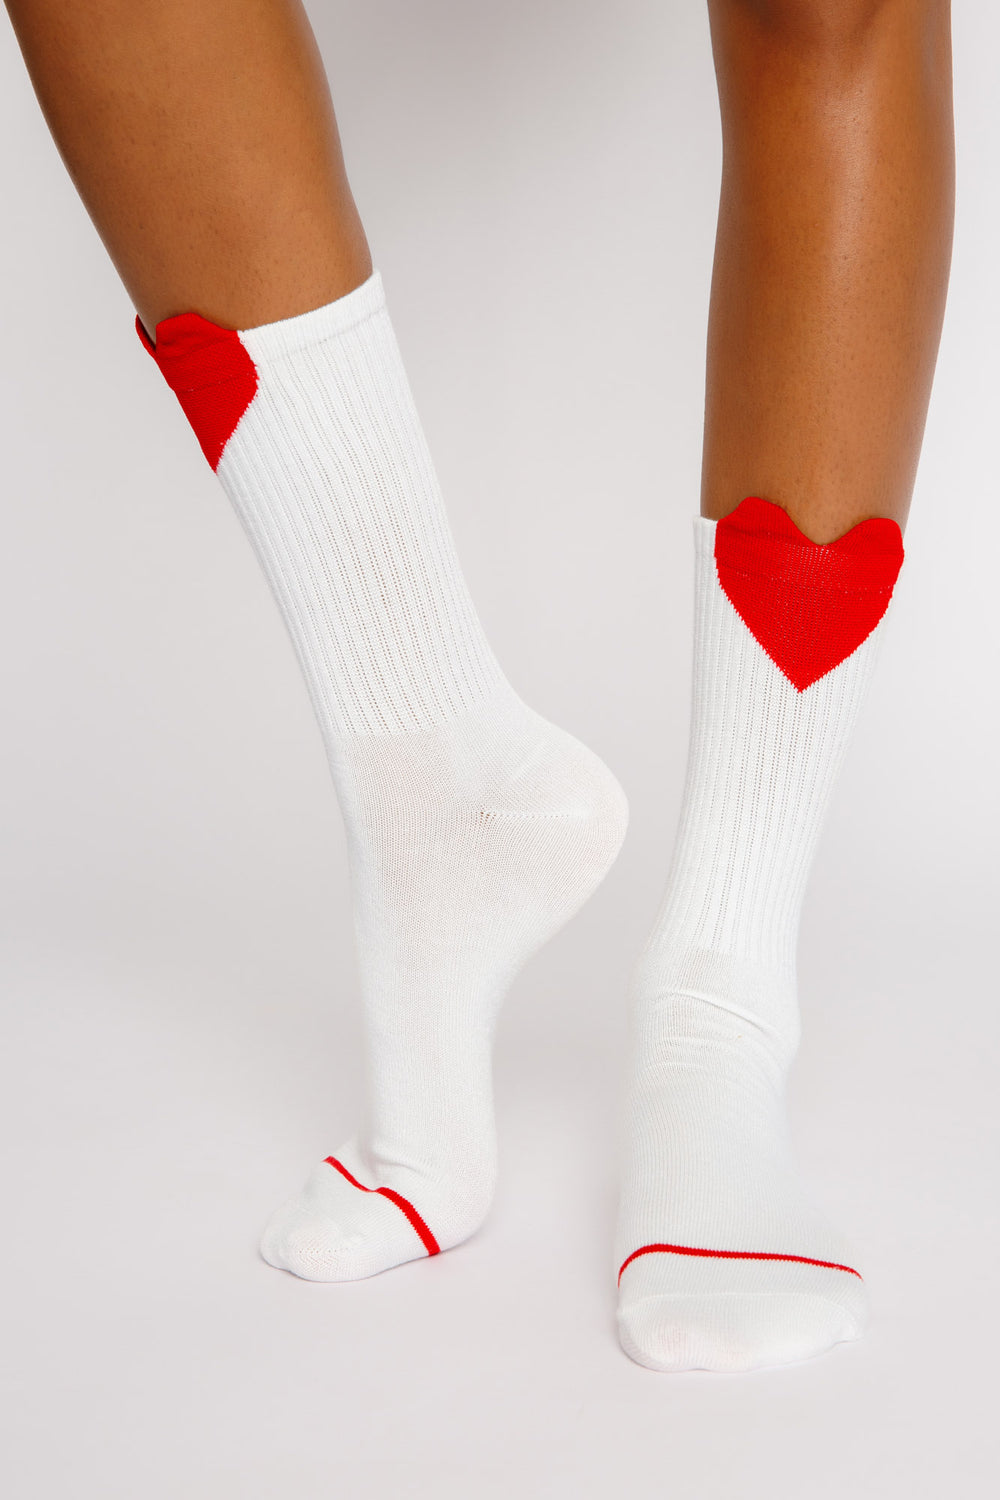 Ivory ribbed cozy socks with red applique heart at top of socks. Gripper print on soles for non-skid. (7325666148452)